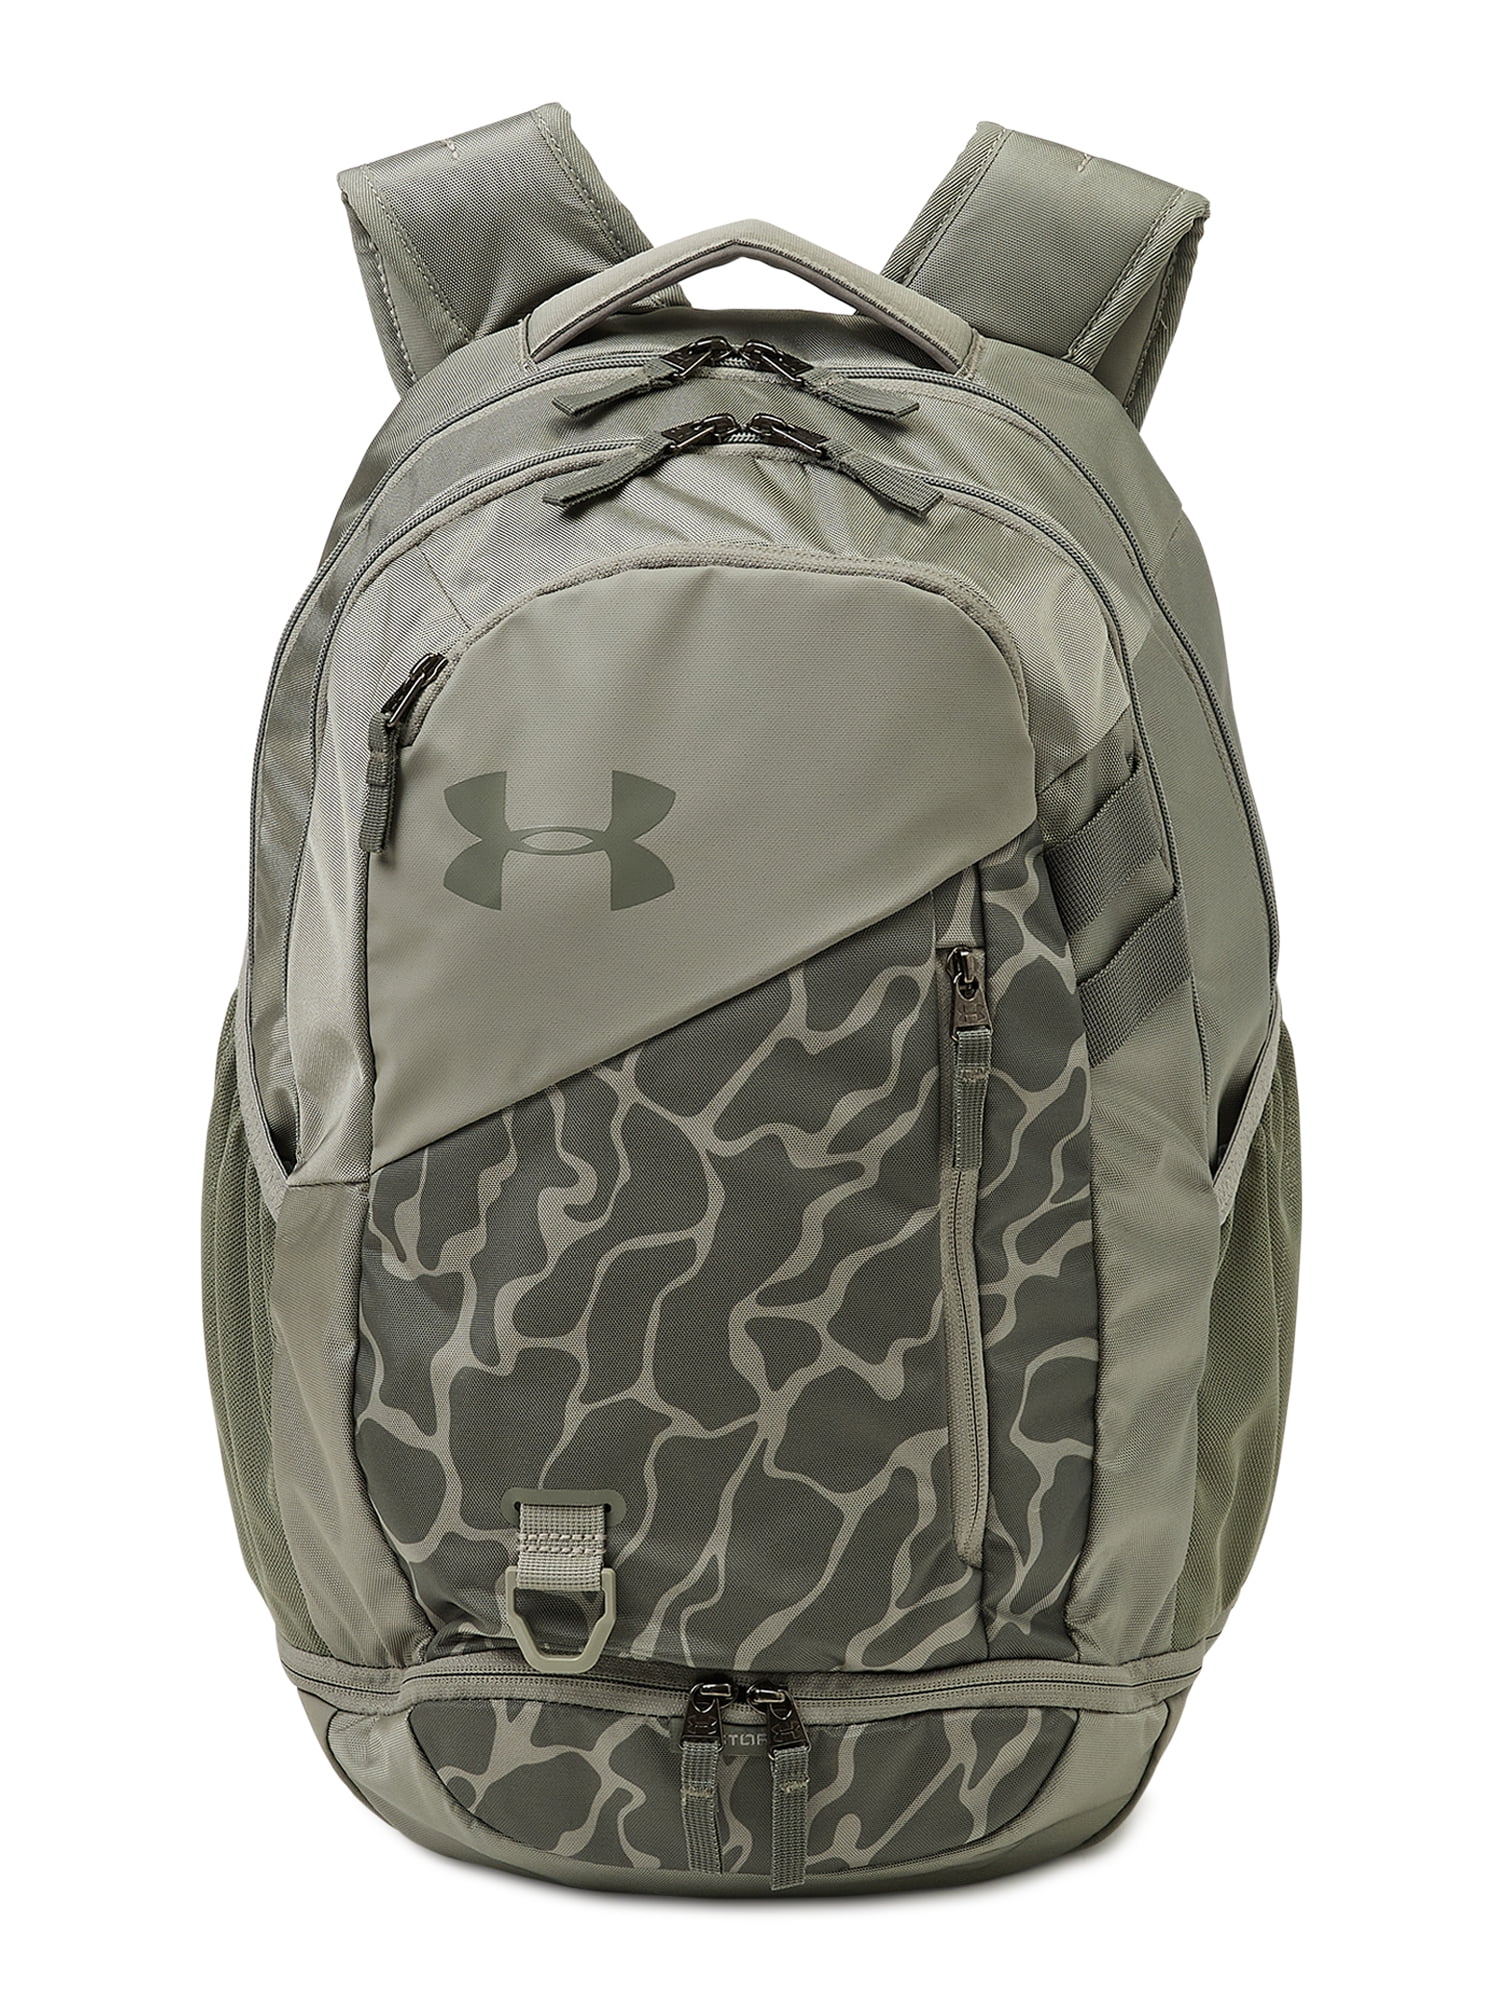 Under Armour, Bags, Under Armour Storm Camo Backpack